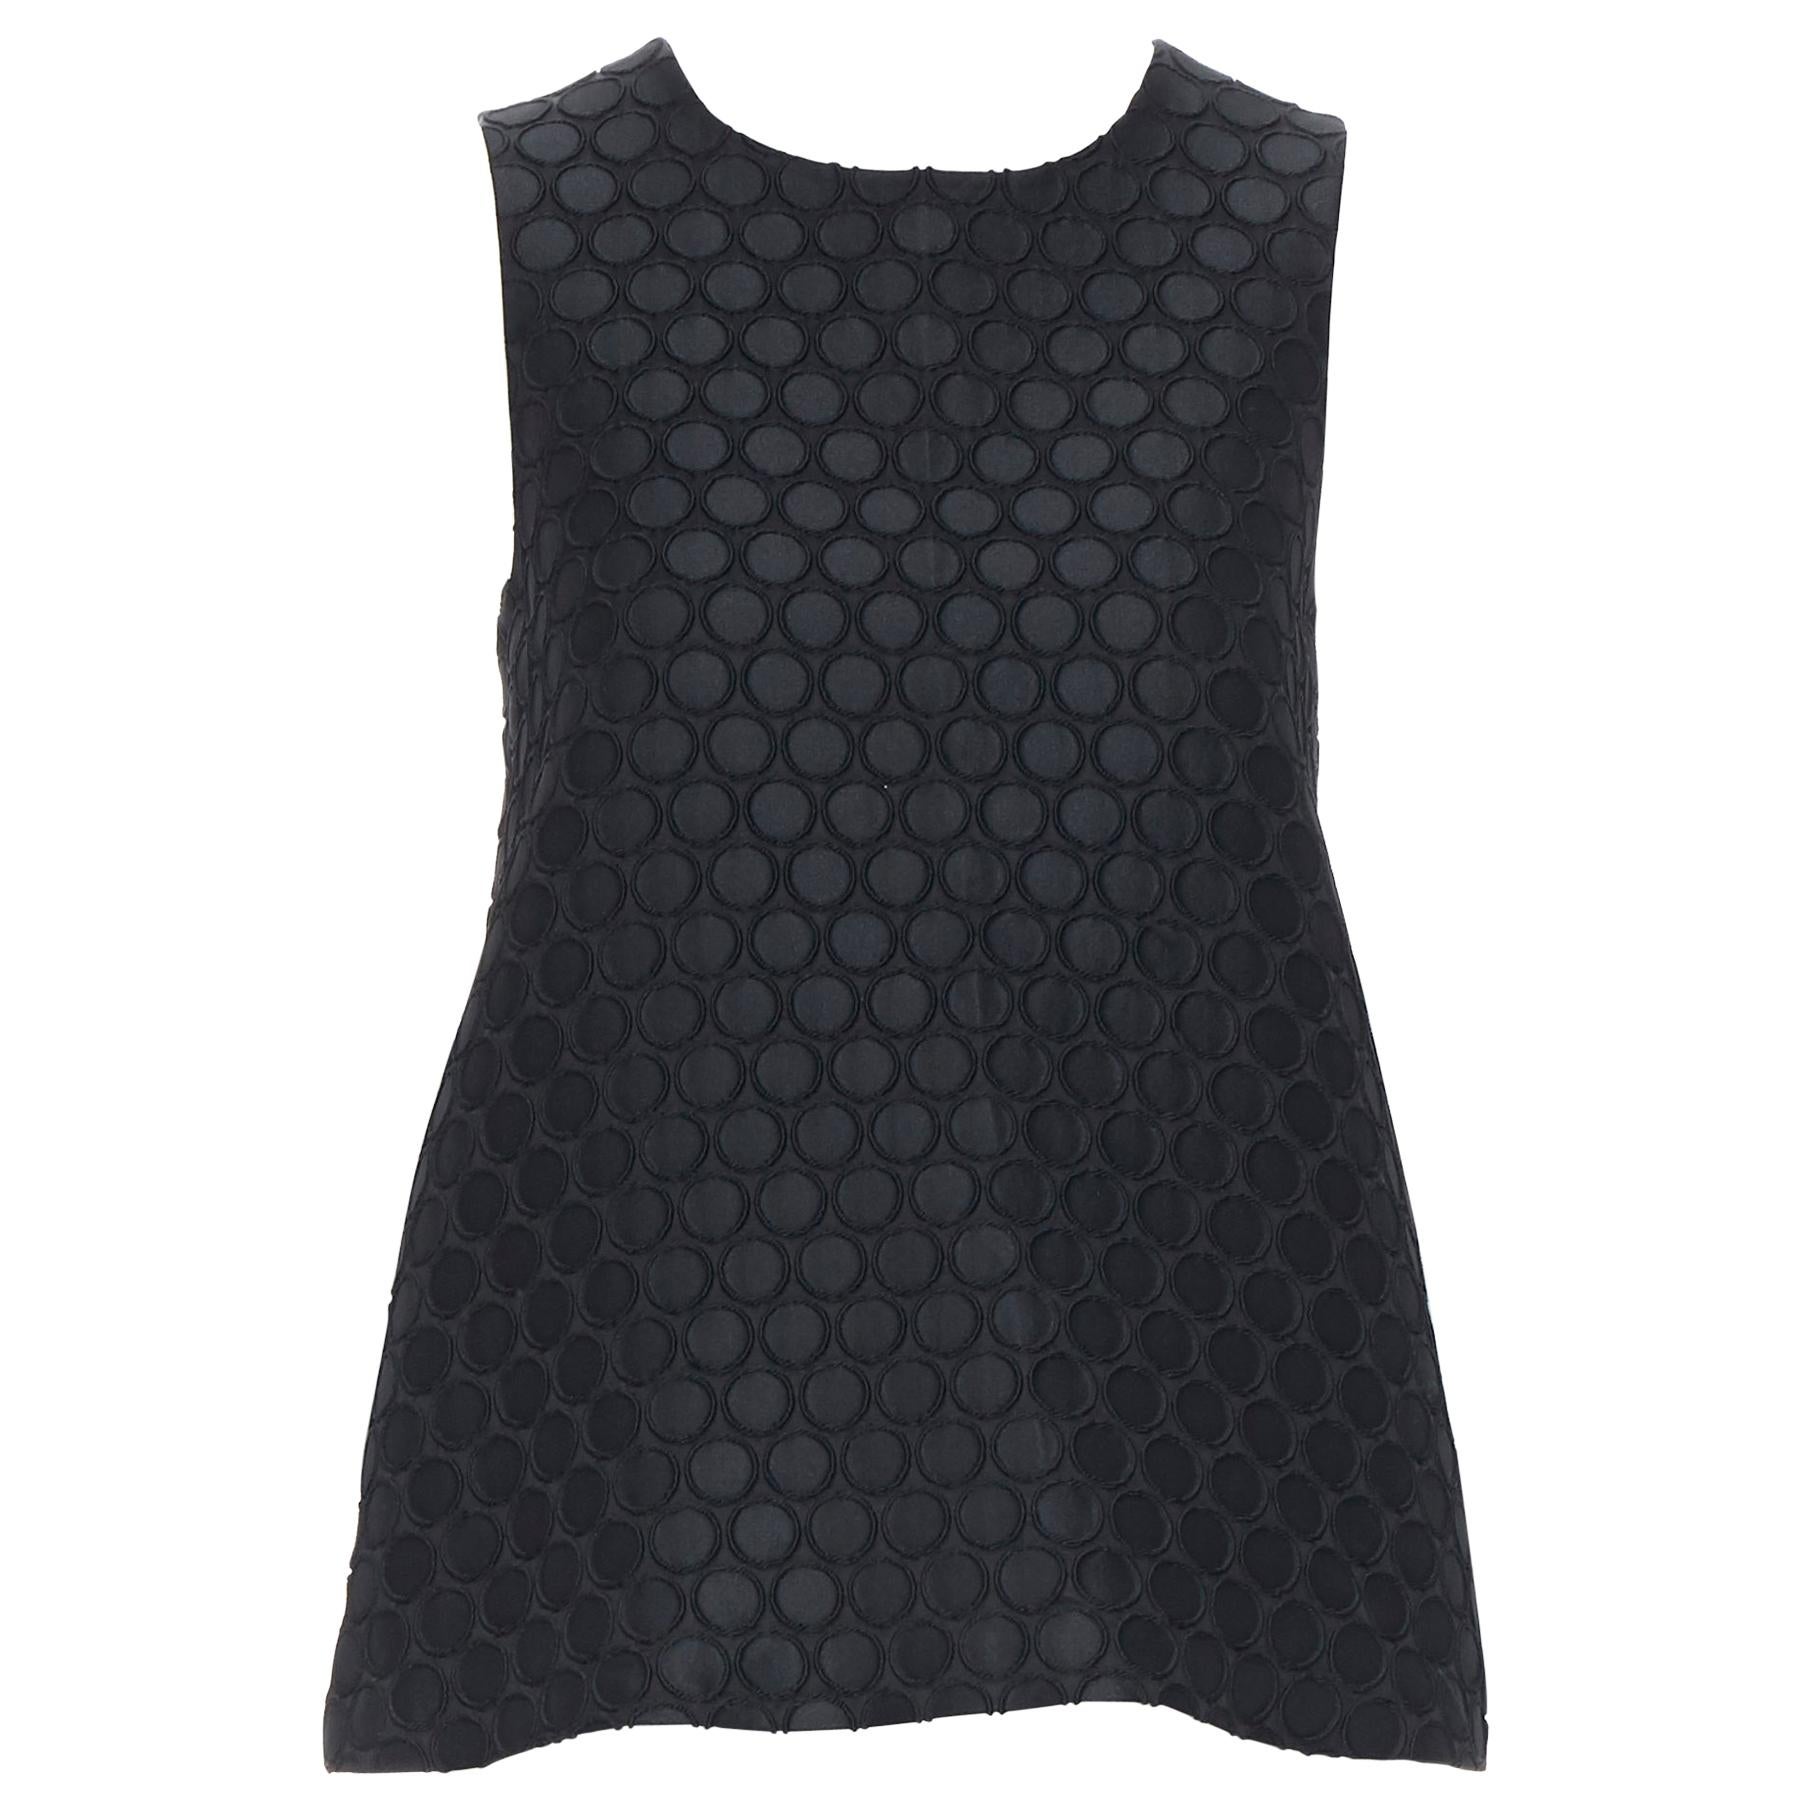 LISA PERRY black texture circle fabric flared A-line sleeveless top US0 XS
Brand: Lisa Perry
Designer: Lisa Perry
Model Name / Style: Flared top
Material: Acetate, polyester
Color: Black
Pattern: Polka Dot
Closure: Zip
Extra Detail: Flared boxy fit.